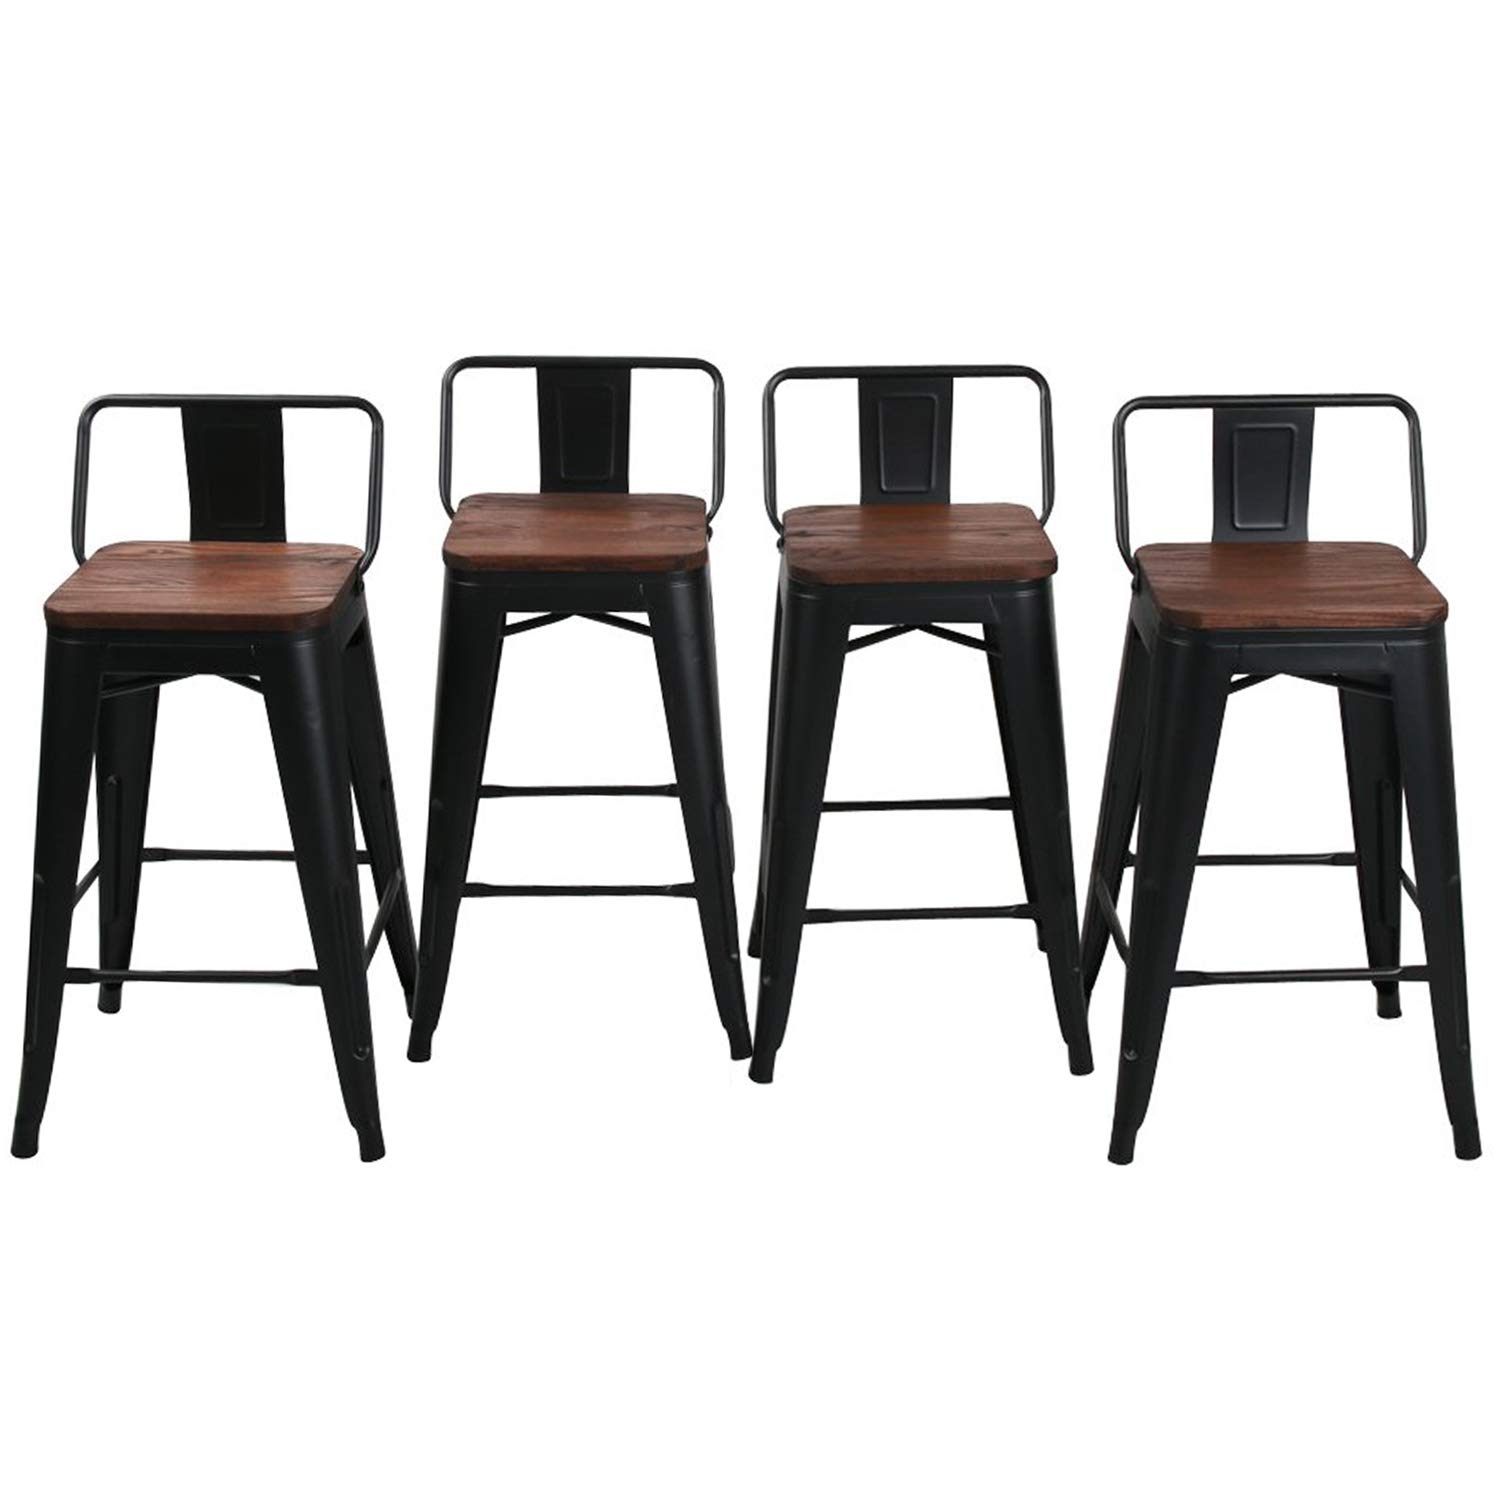 HAOBO Home 24" Low Back Metal Counter Stool Height Bar Stools with Wooden Seat